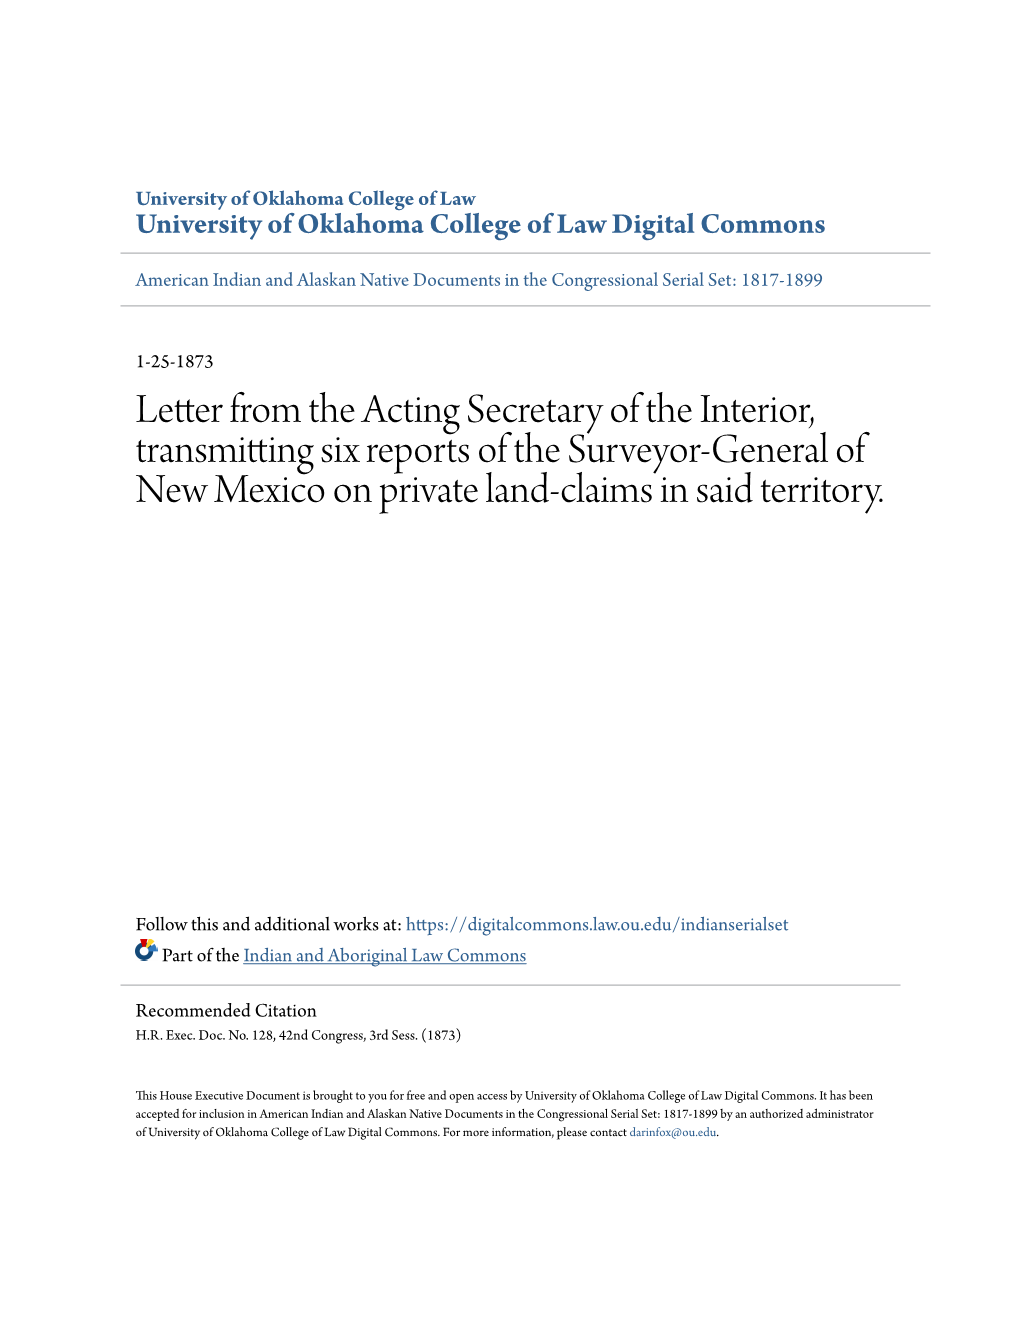 Letter from the Acting Secretary of the Interior, Transmitting Six Reports of the Surveyor-General of New Mexico on Private Land-Claims in Said Territory